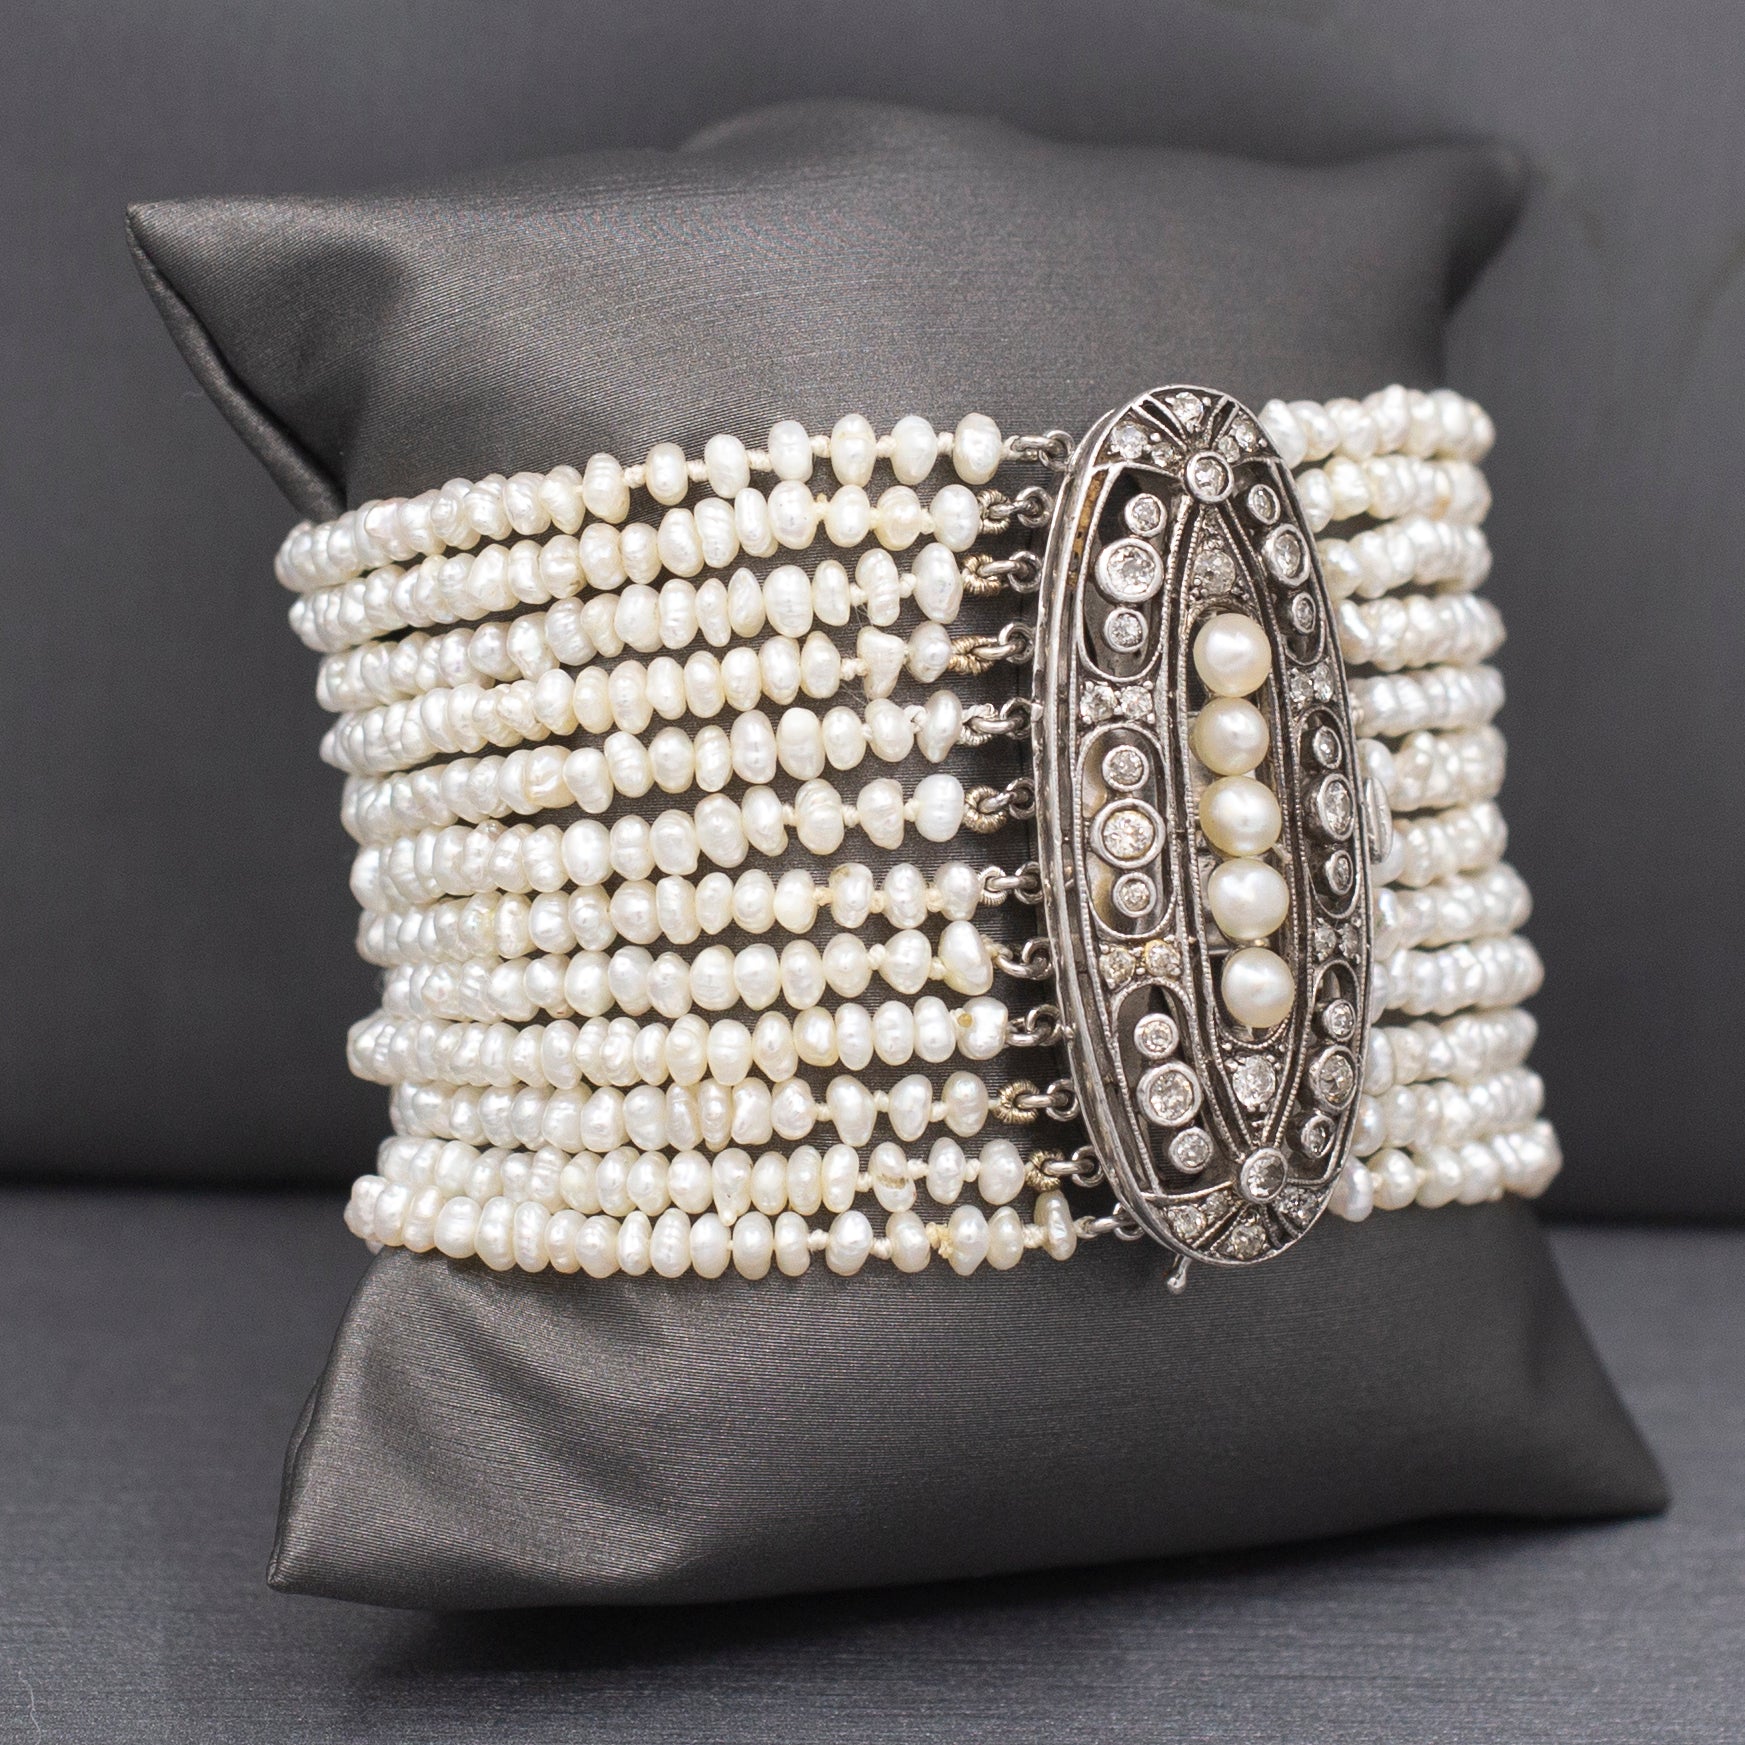 Exquisite Antique Victorian 12 Row Pearl and Old European Cut Diamond Bracelet Size Extra-Small